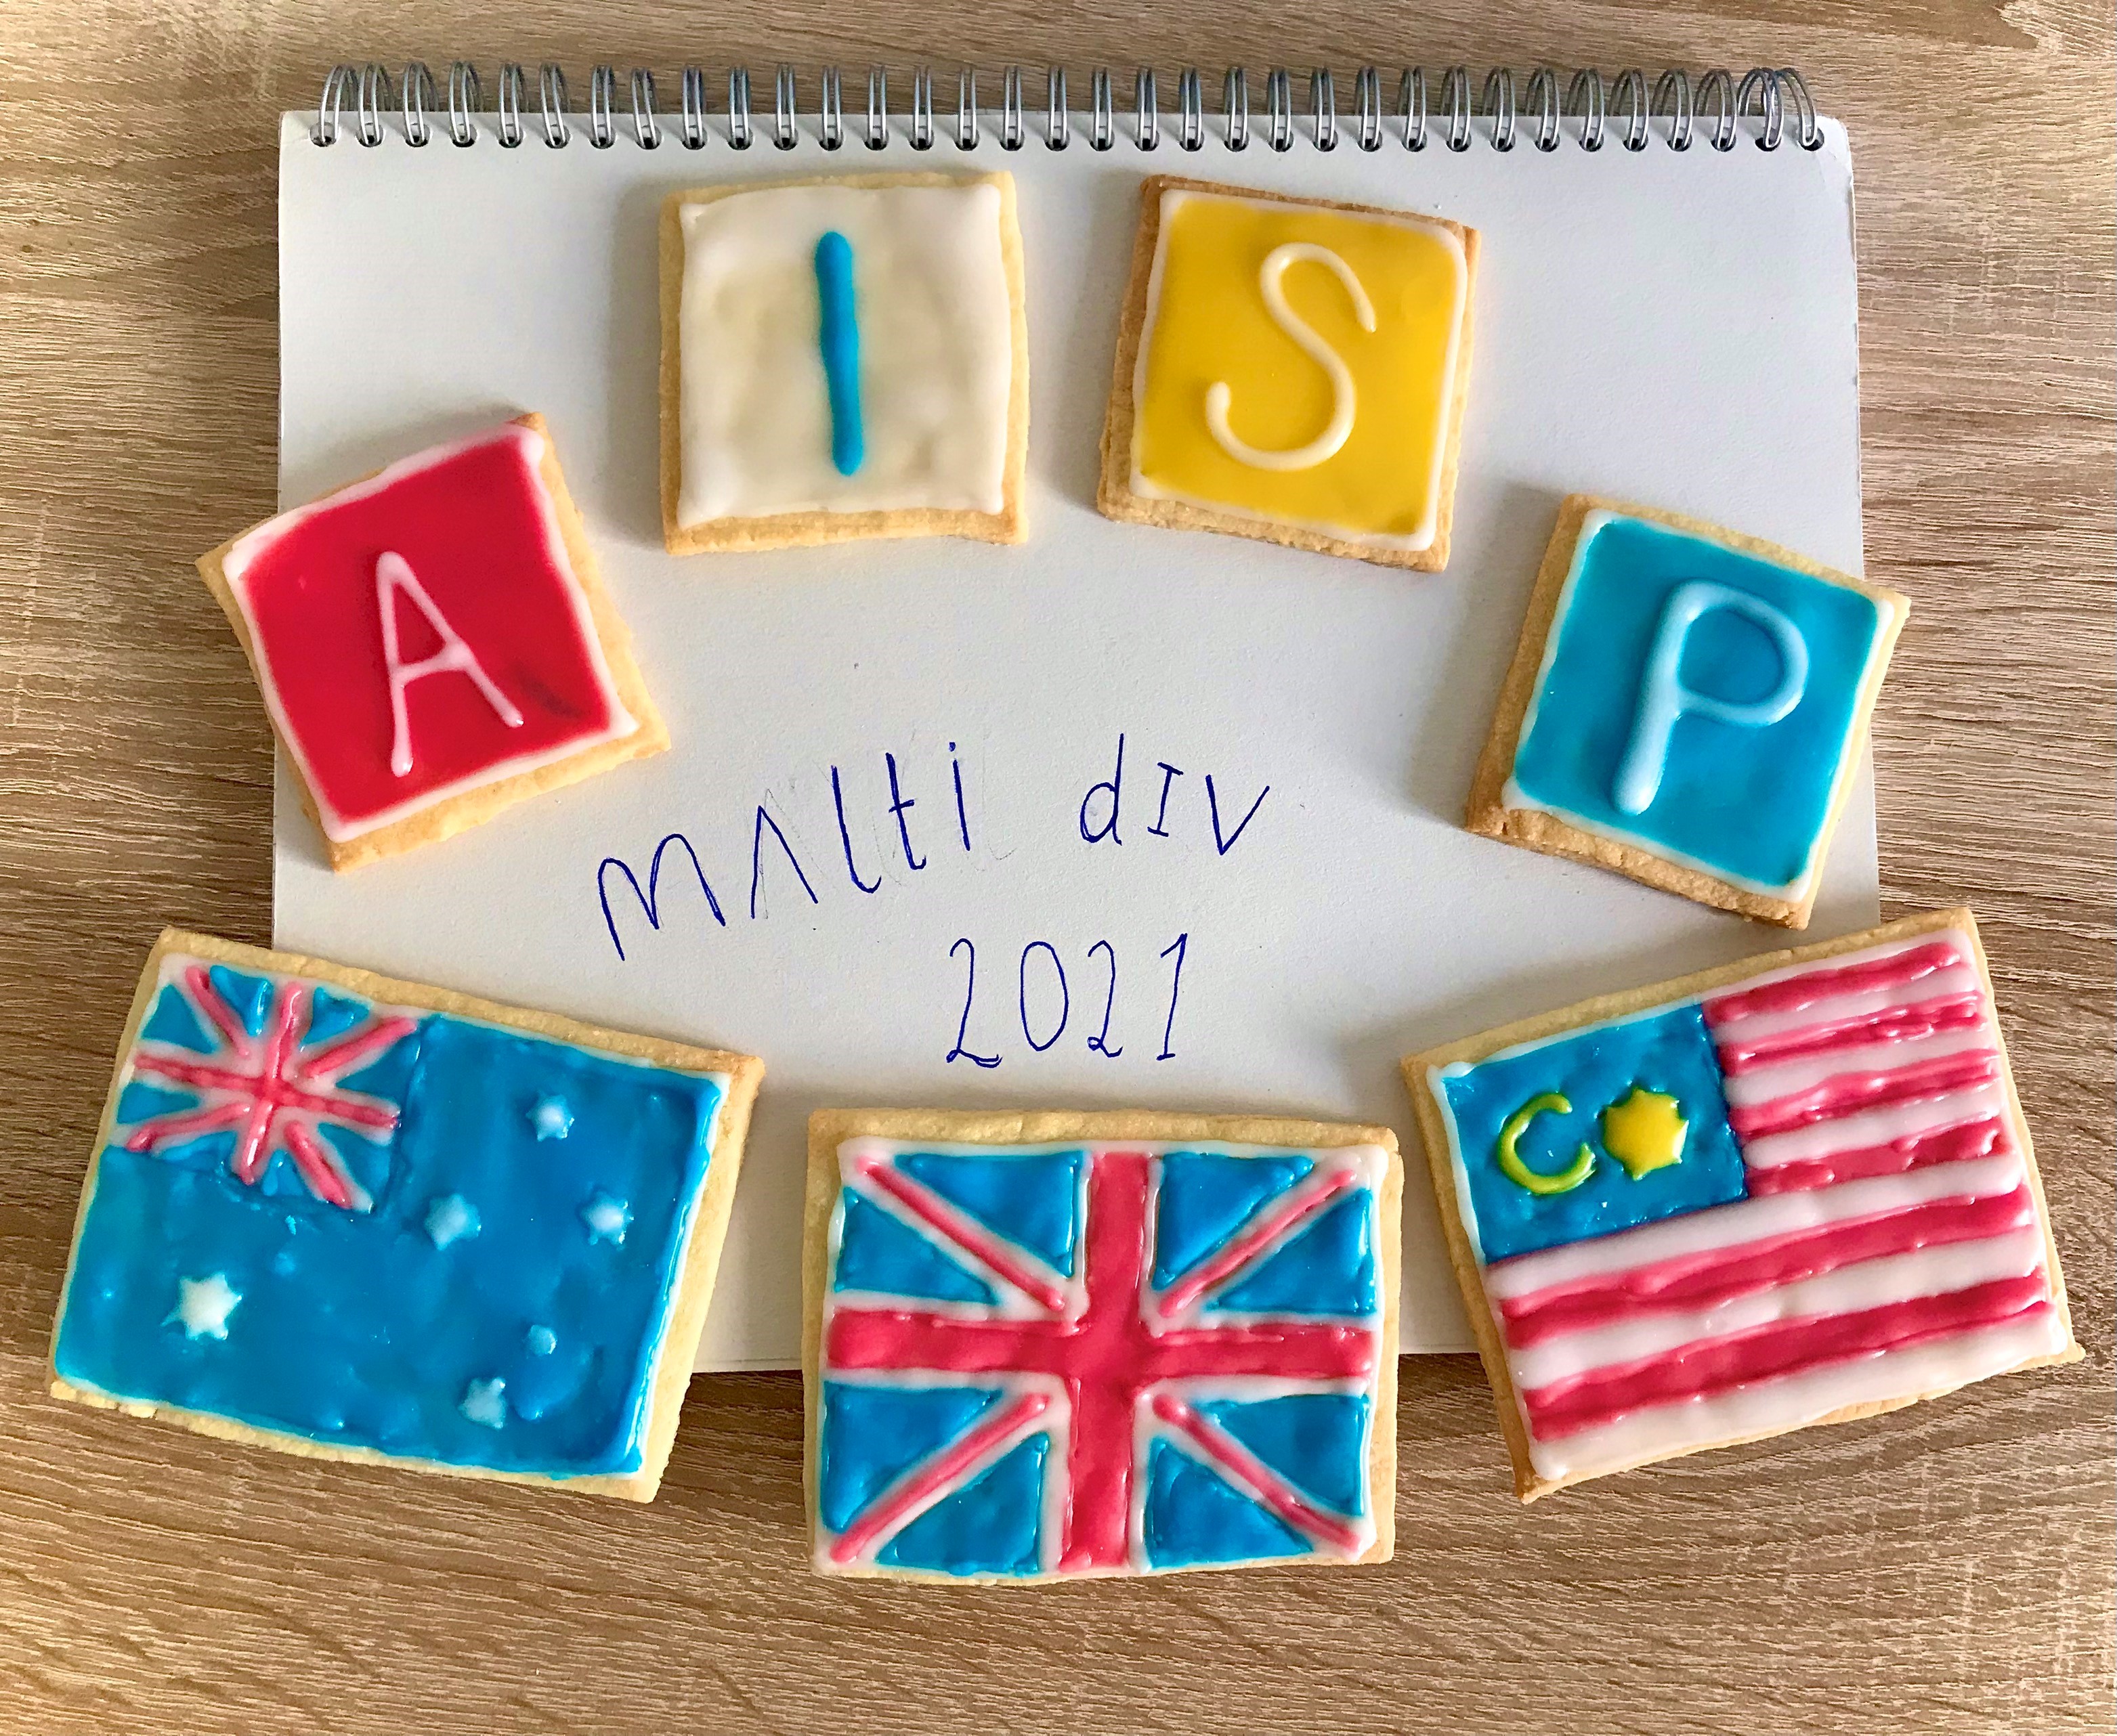 Multi Div 2021 with biscuits decorated with AISP and flags from Australia, UK and Malysia 